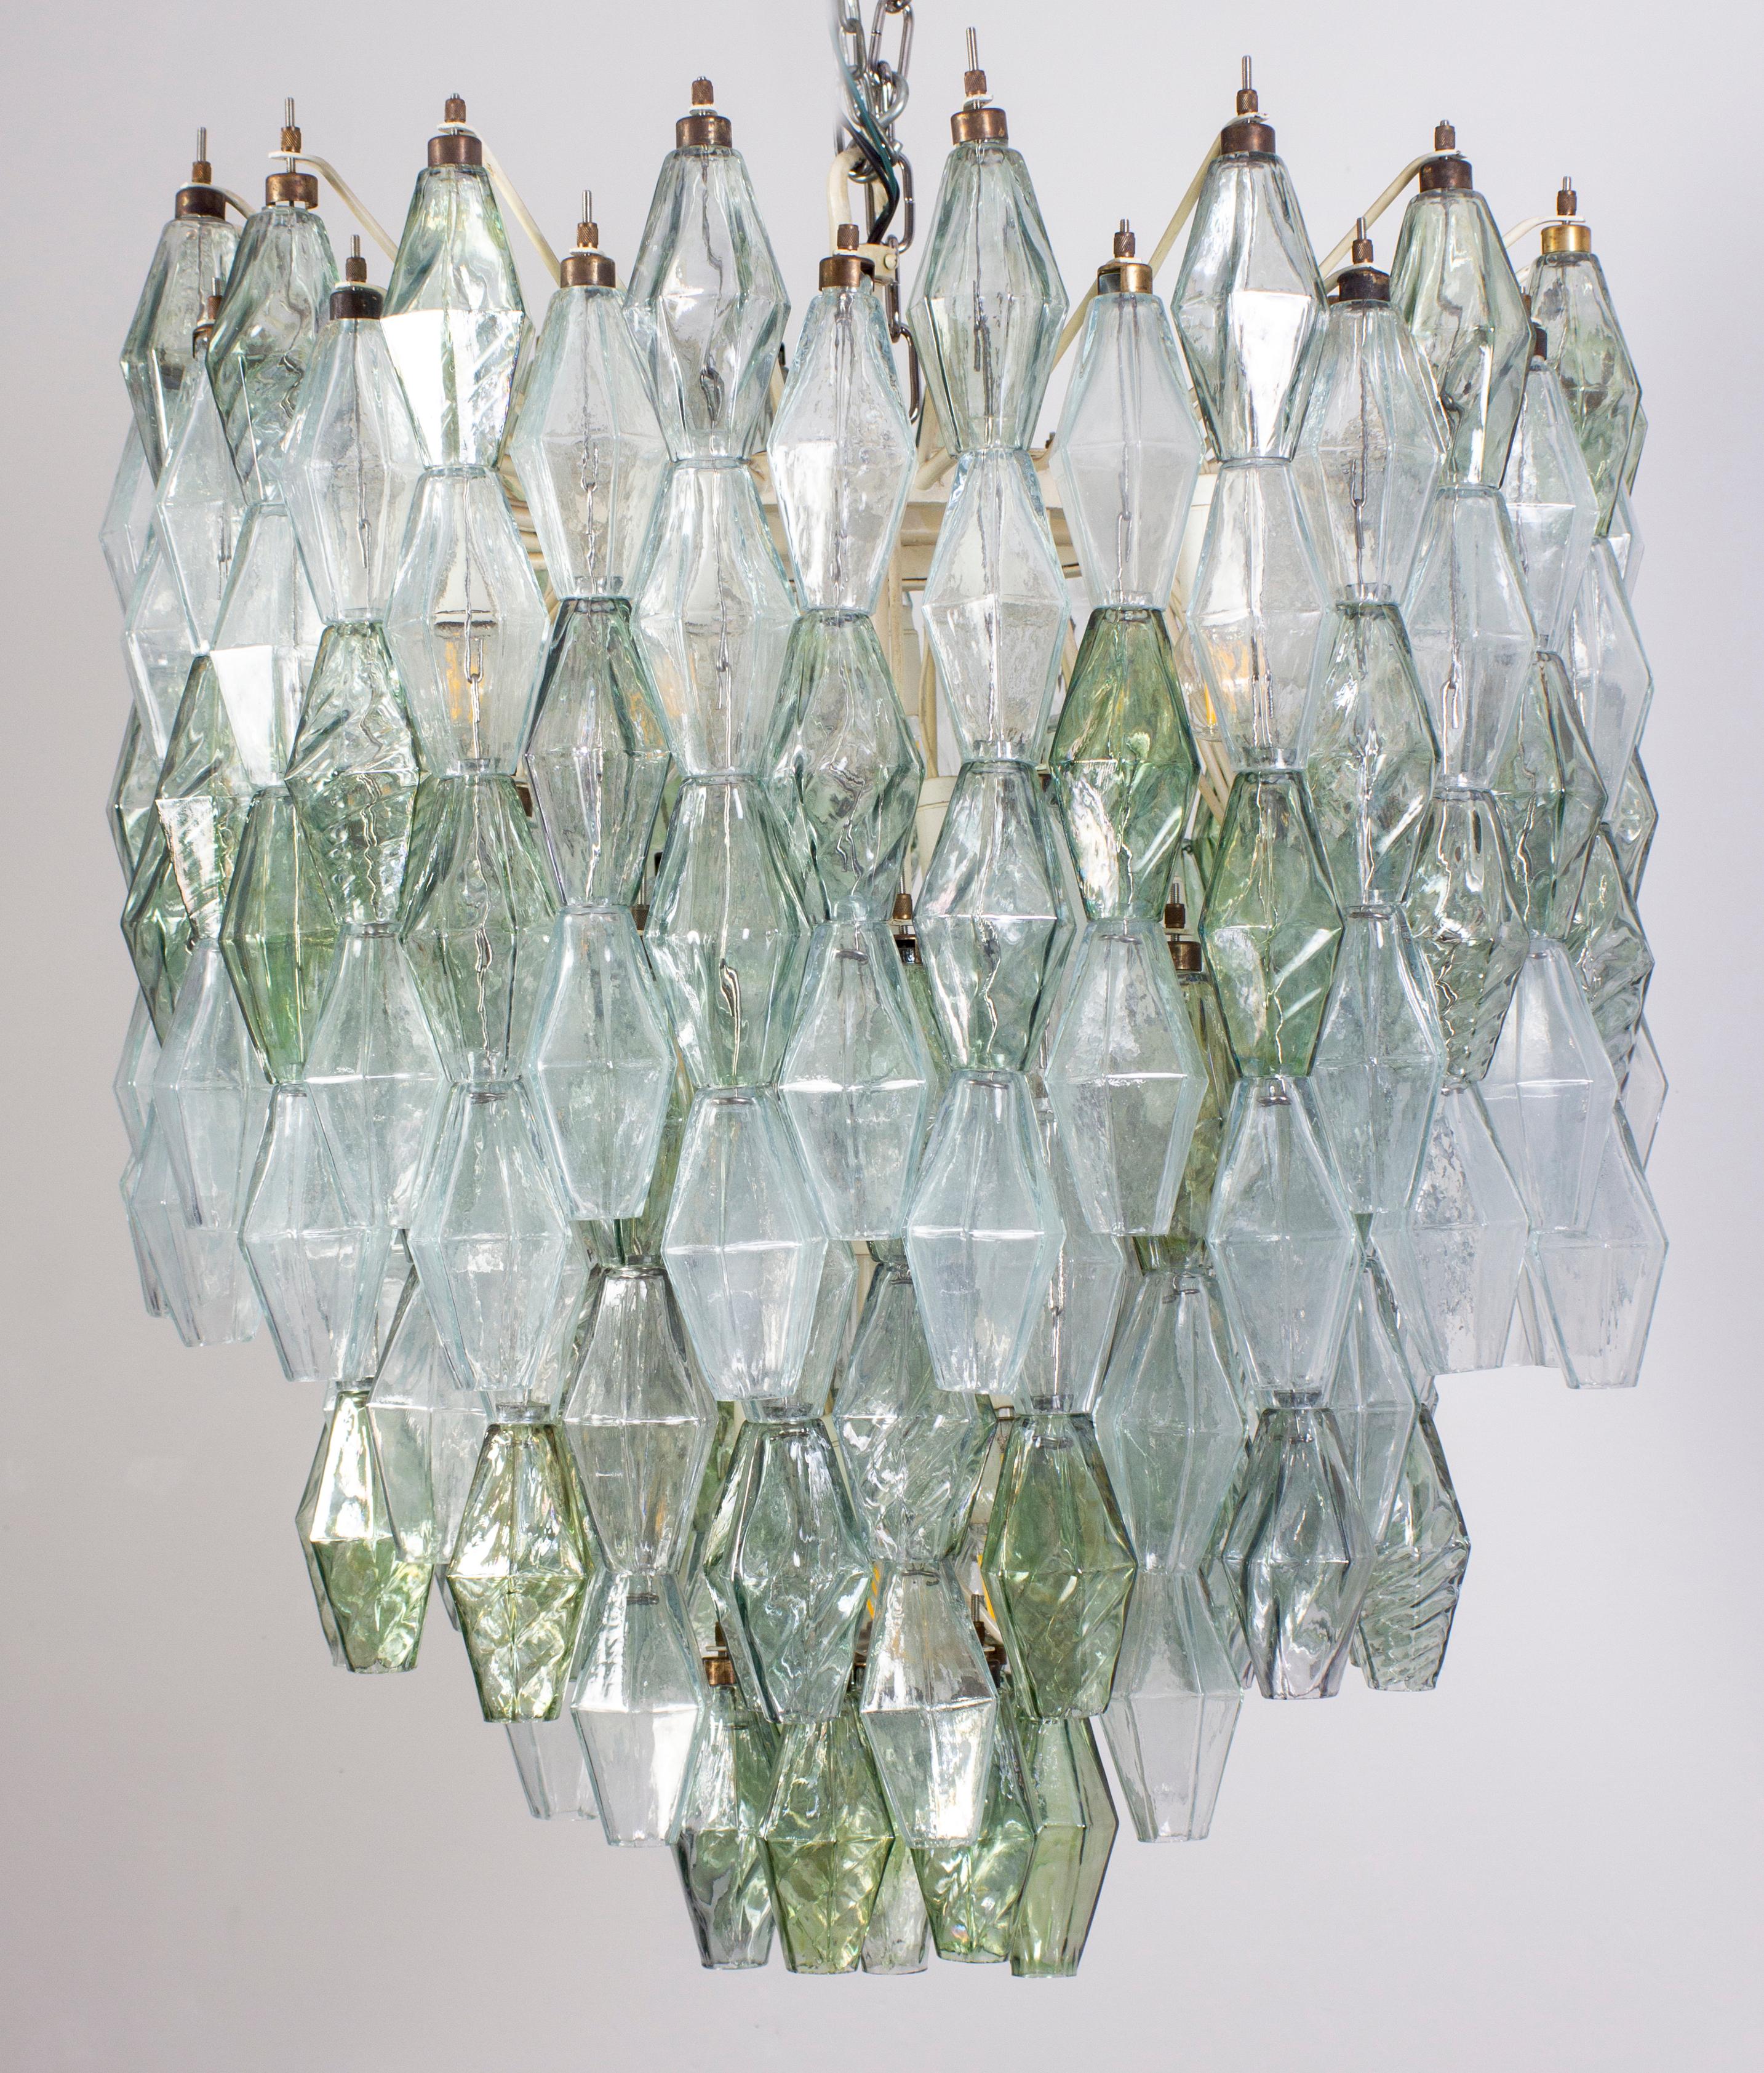 Fabulous original Polyhedral Murano glass chandelier. Rare combination green and clear colored poliedri hanging from the metal tiers at several levels.
Ivory painted round shaped frame in very good and fully original condition.
The chandelier holds